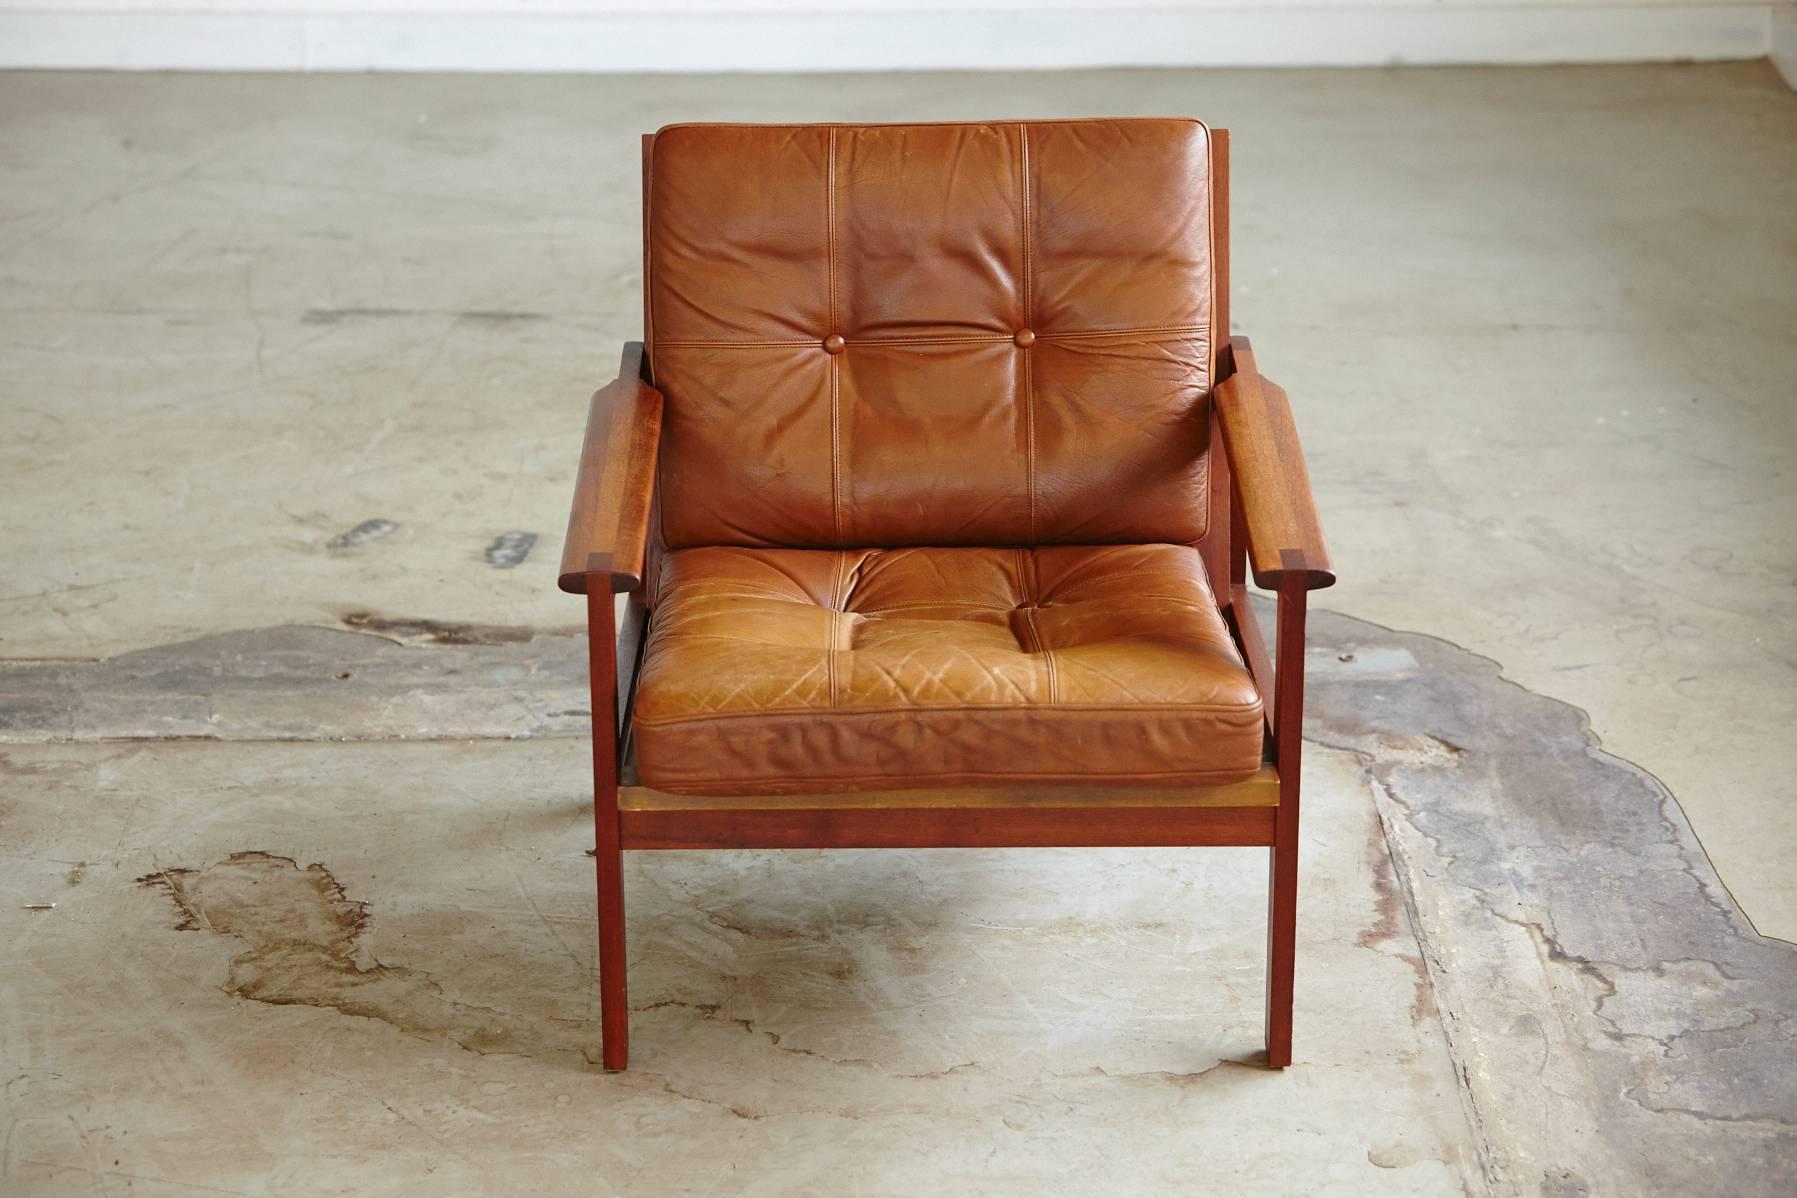 Leather armchair in teak from the Capella series designed in 1958 by Danish designer Illum Wikkelsø for N. Eilersen. 
Beautiful wood detailing on the armrests, loose leather cushions with a wonderful back structure.
The armchair comes in an